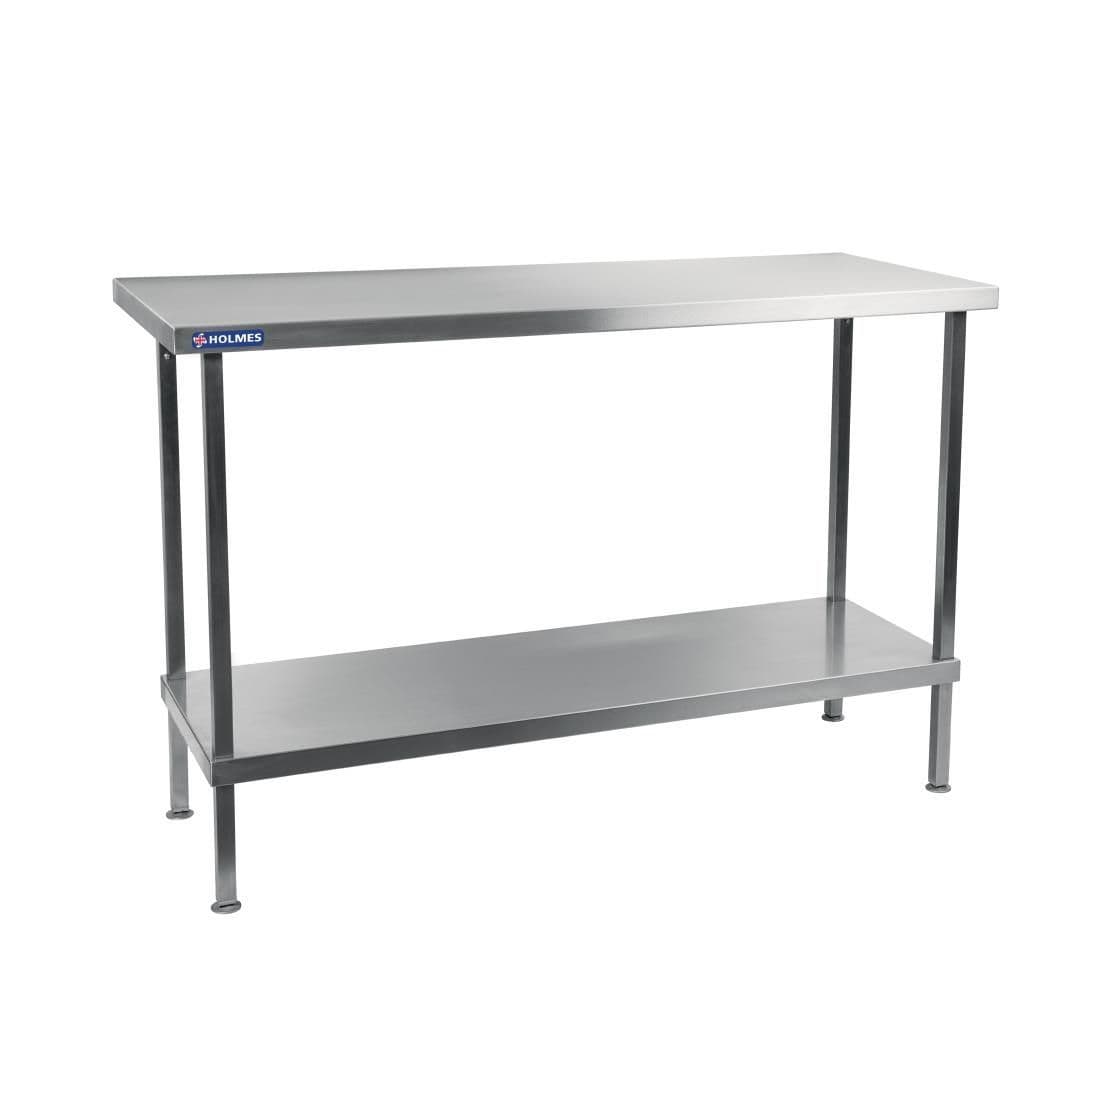 DR049 Holmes Stainless Steel Centre Table 900mm JD Catering Equipment Solutions Ltd